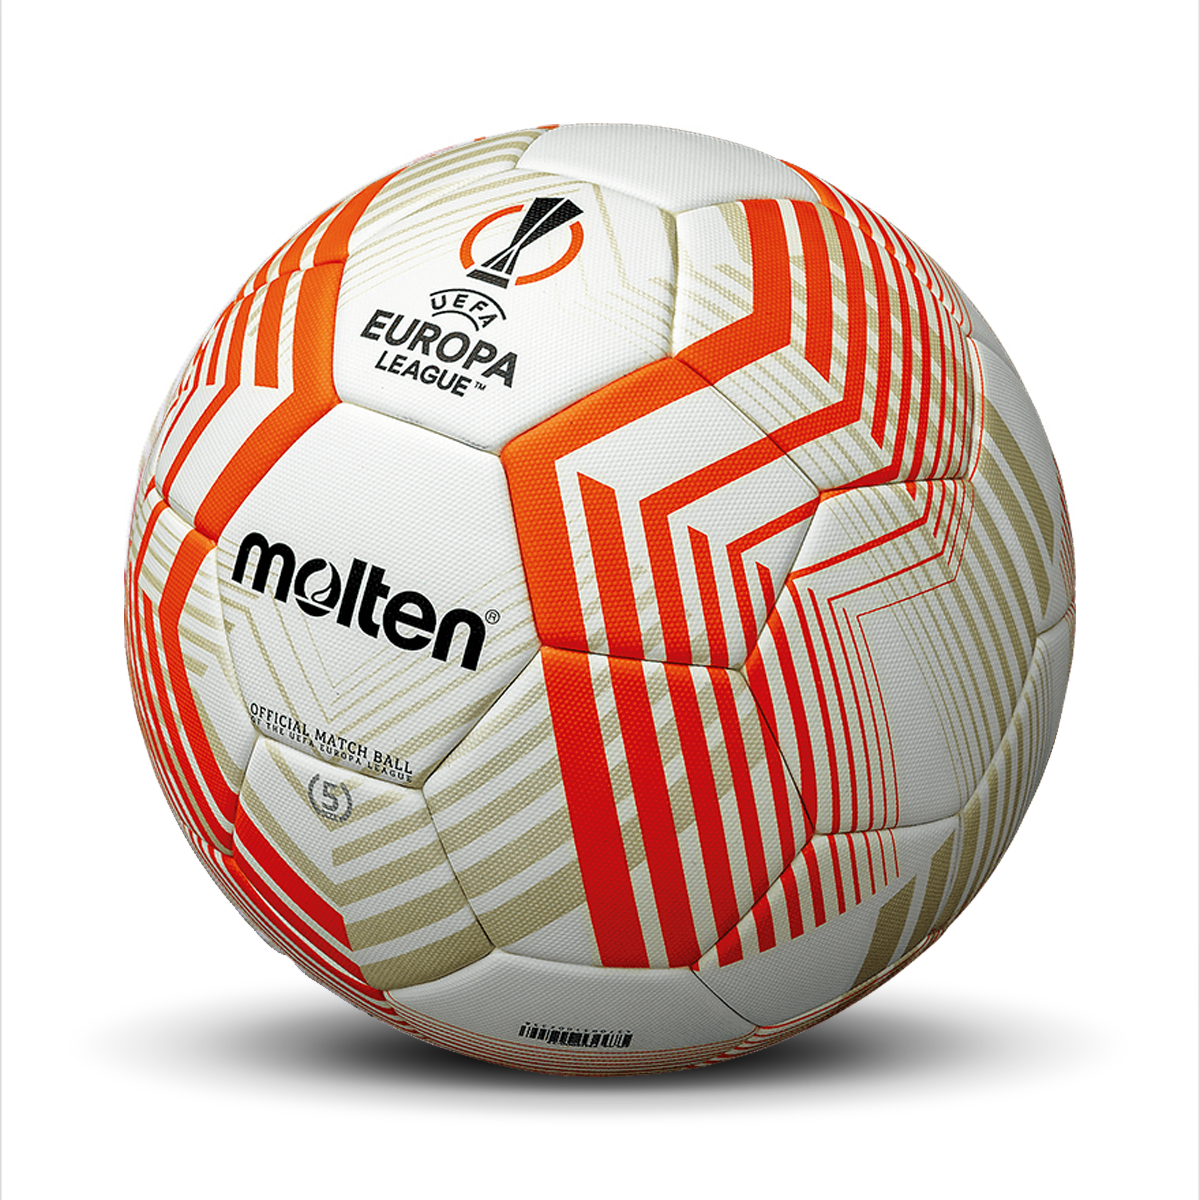 UEFA Europa League 22/23 Molten Official Match Football UEFA Club Competitions Online Store